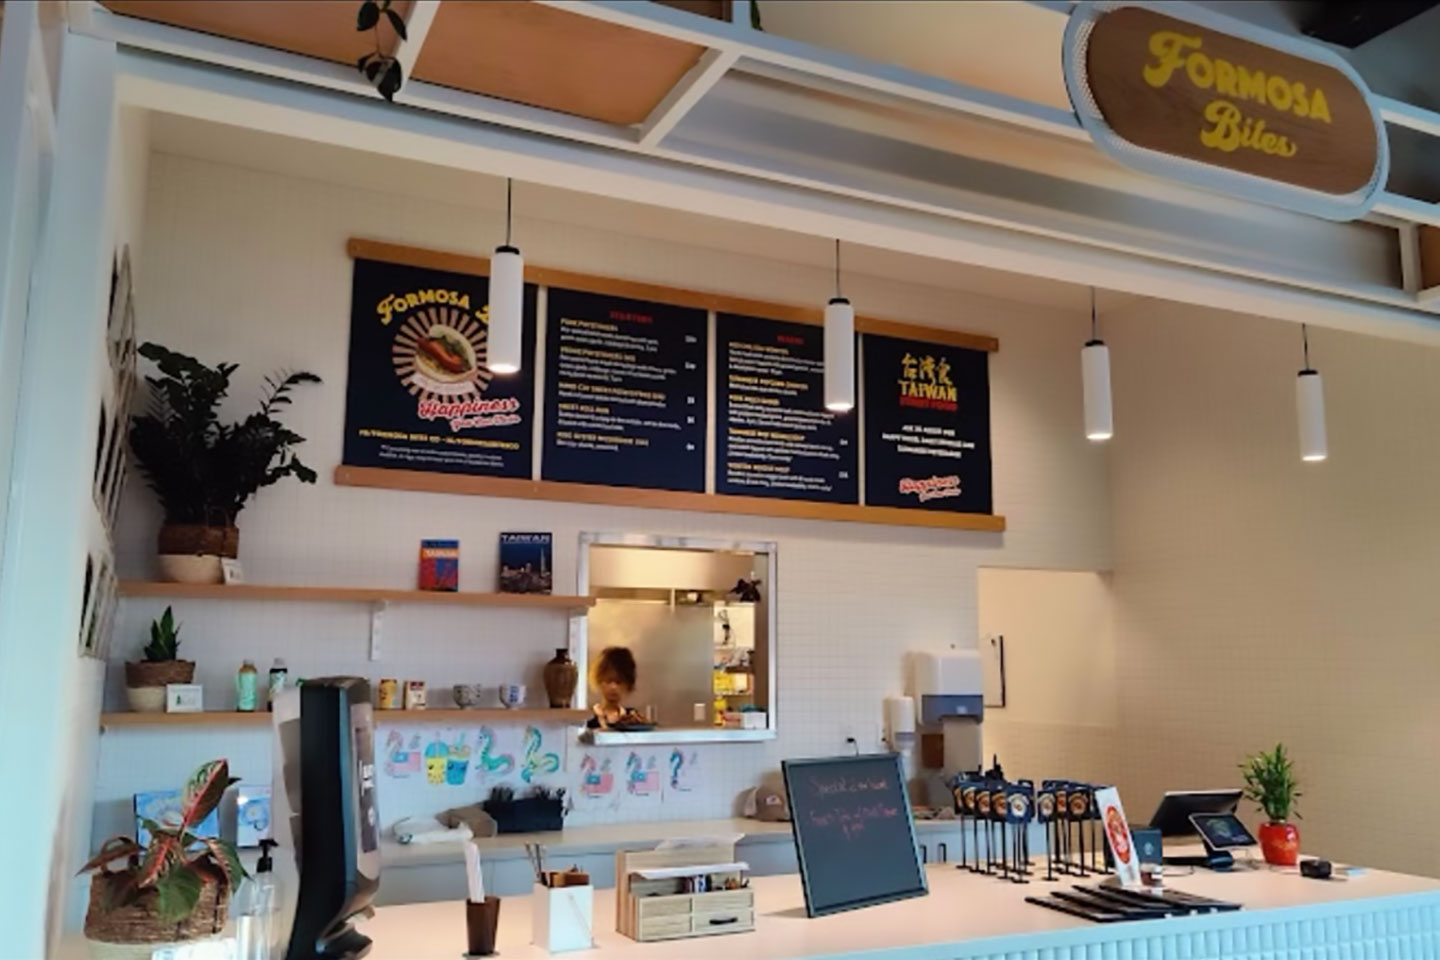 Formosa Bites serves authentic Taiwanese Street Food favorites such as marinated popcorn chicken, handcrafted dumplings, noodle soups and more! Located in The Well: 315 E Pikes Peak Ave Suite 100
https://www.facebook.com/formosabitesco